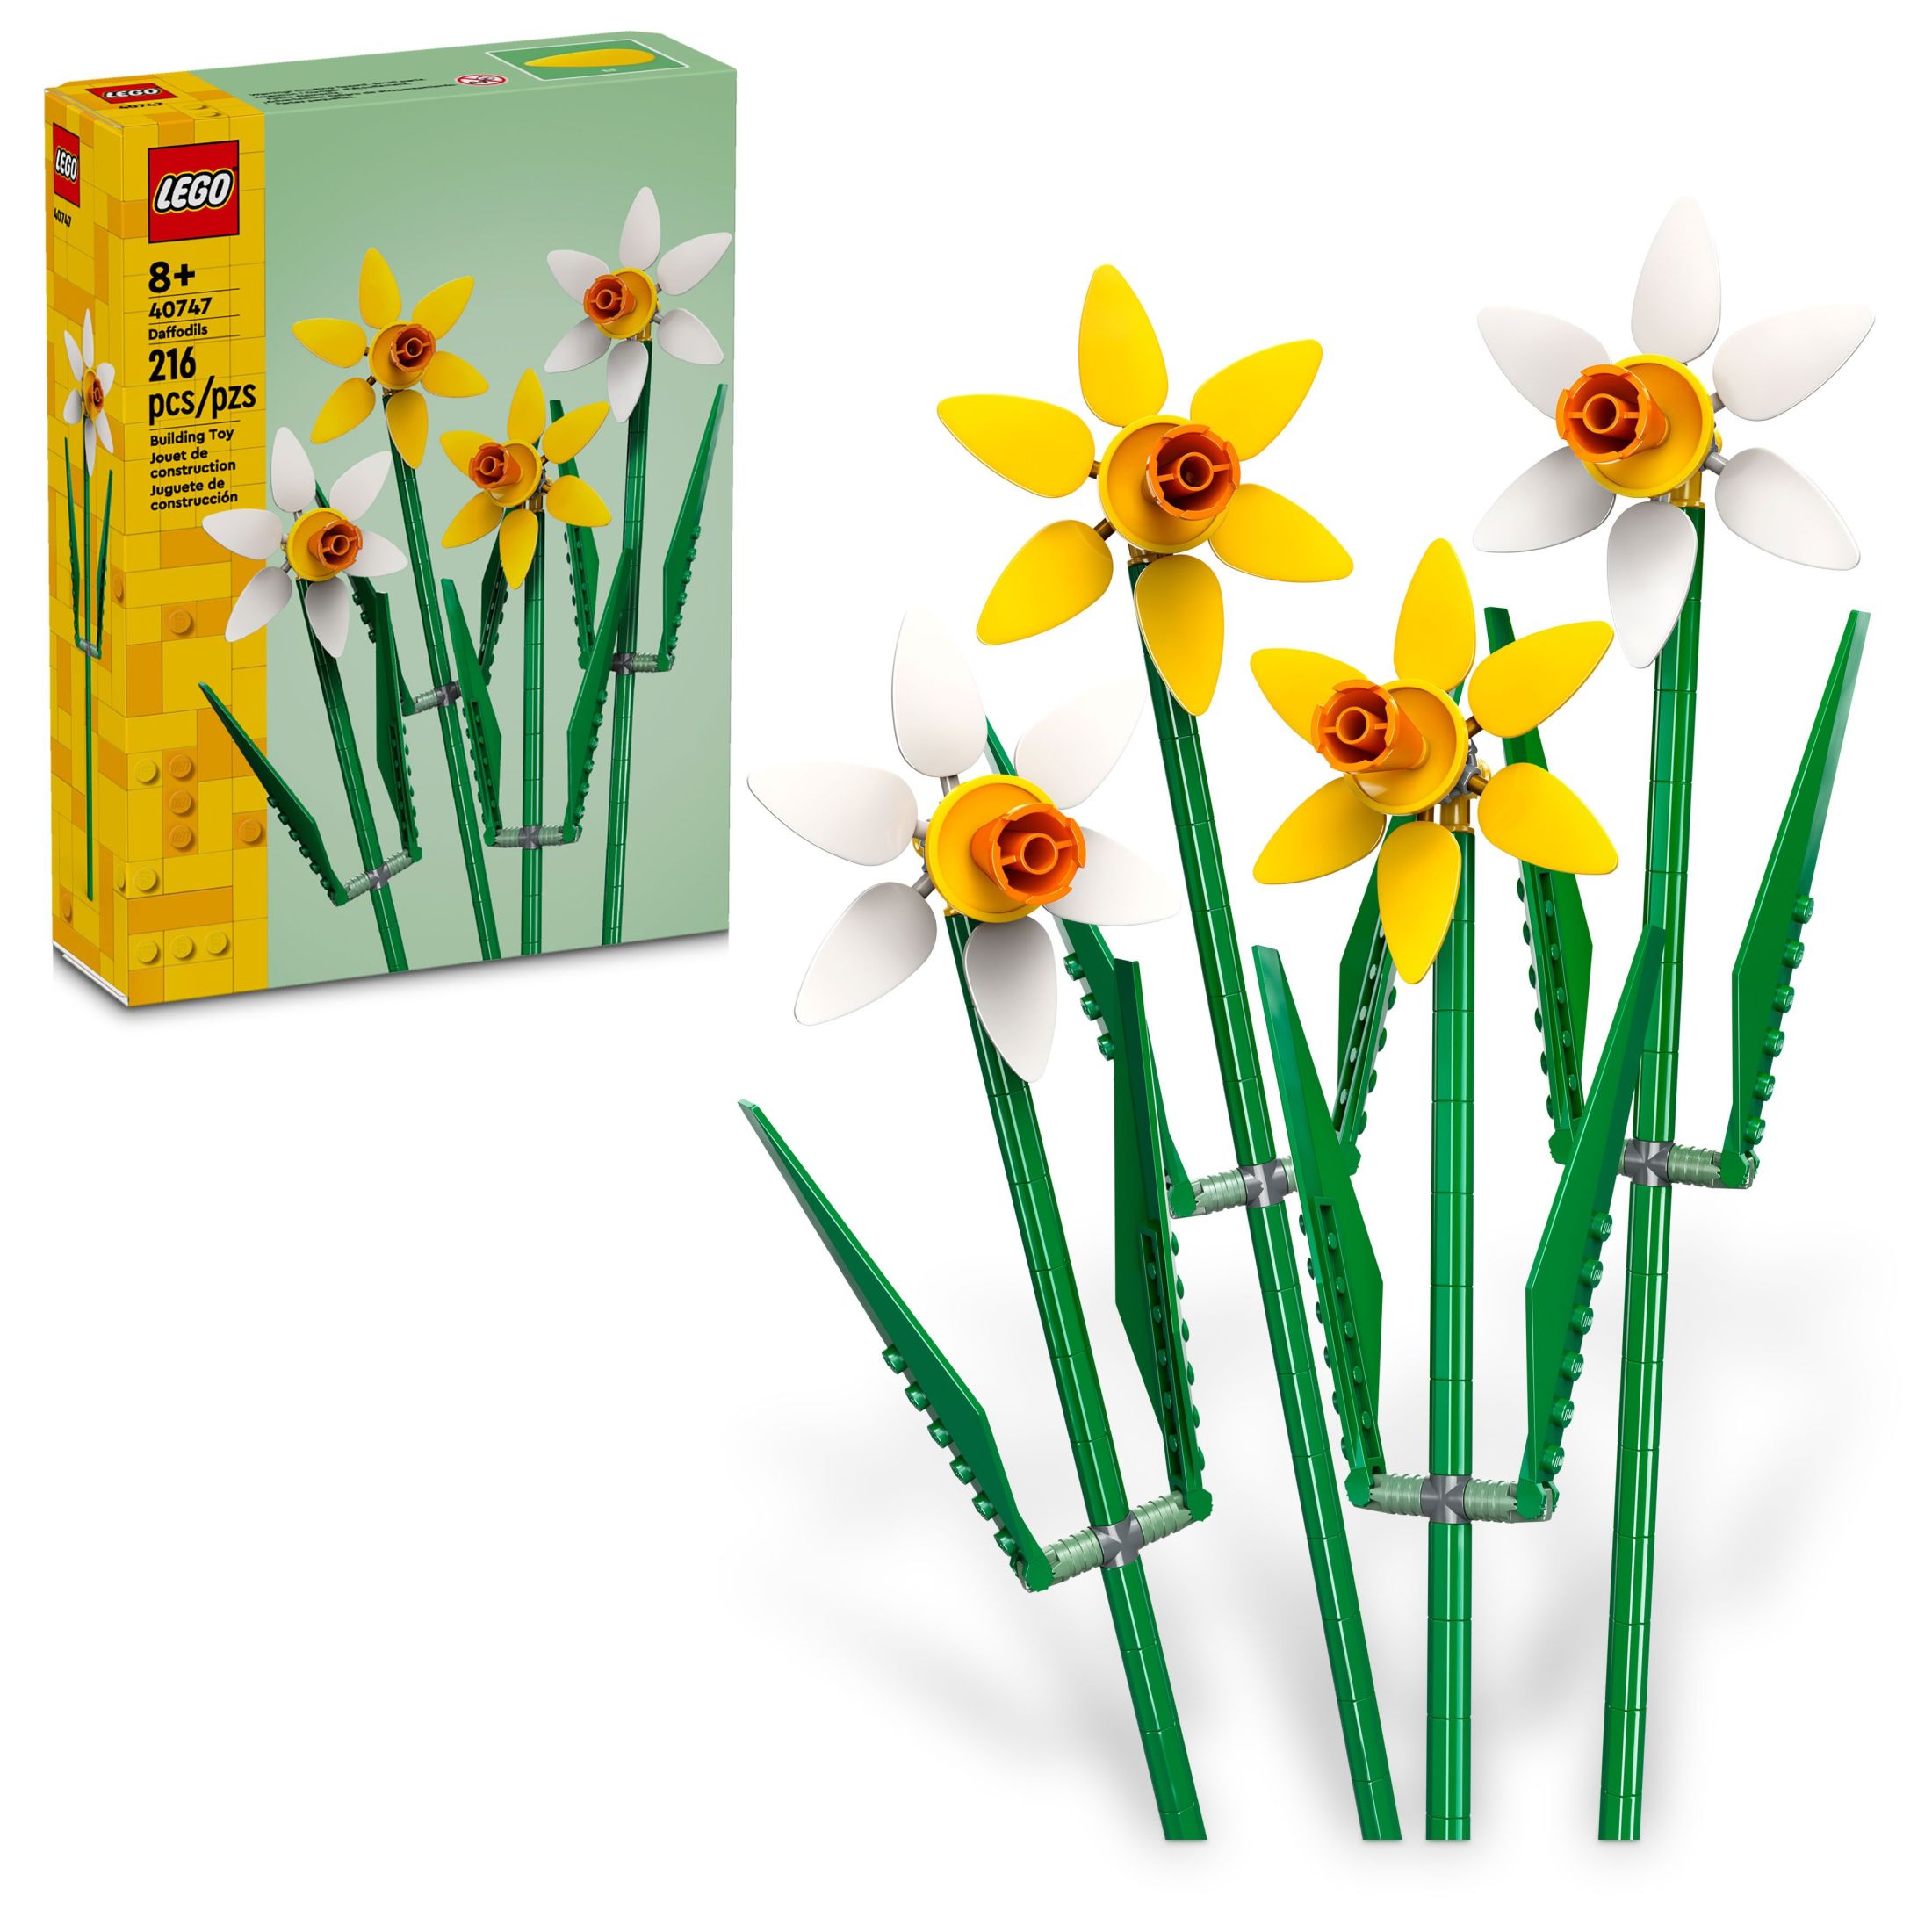 LEGO Daffodils Celebration Gift, Yellow and White Daffodils, Spring Flower Room Decor, Great Gift for Flower Lovers, 40747 - image 1 of 8